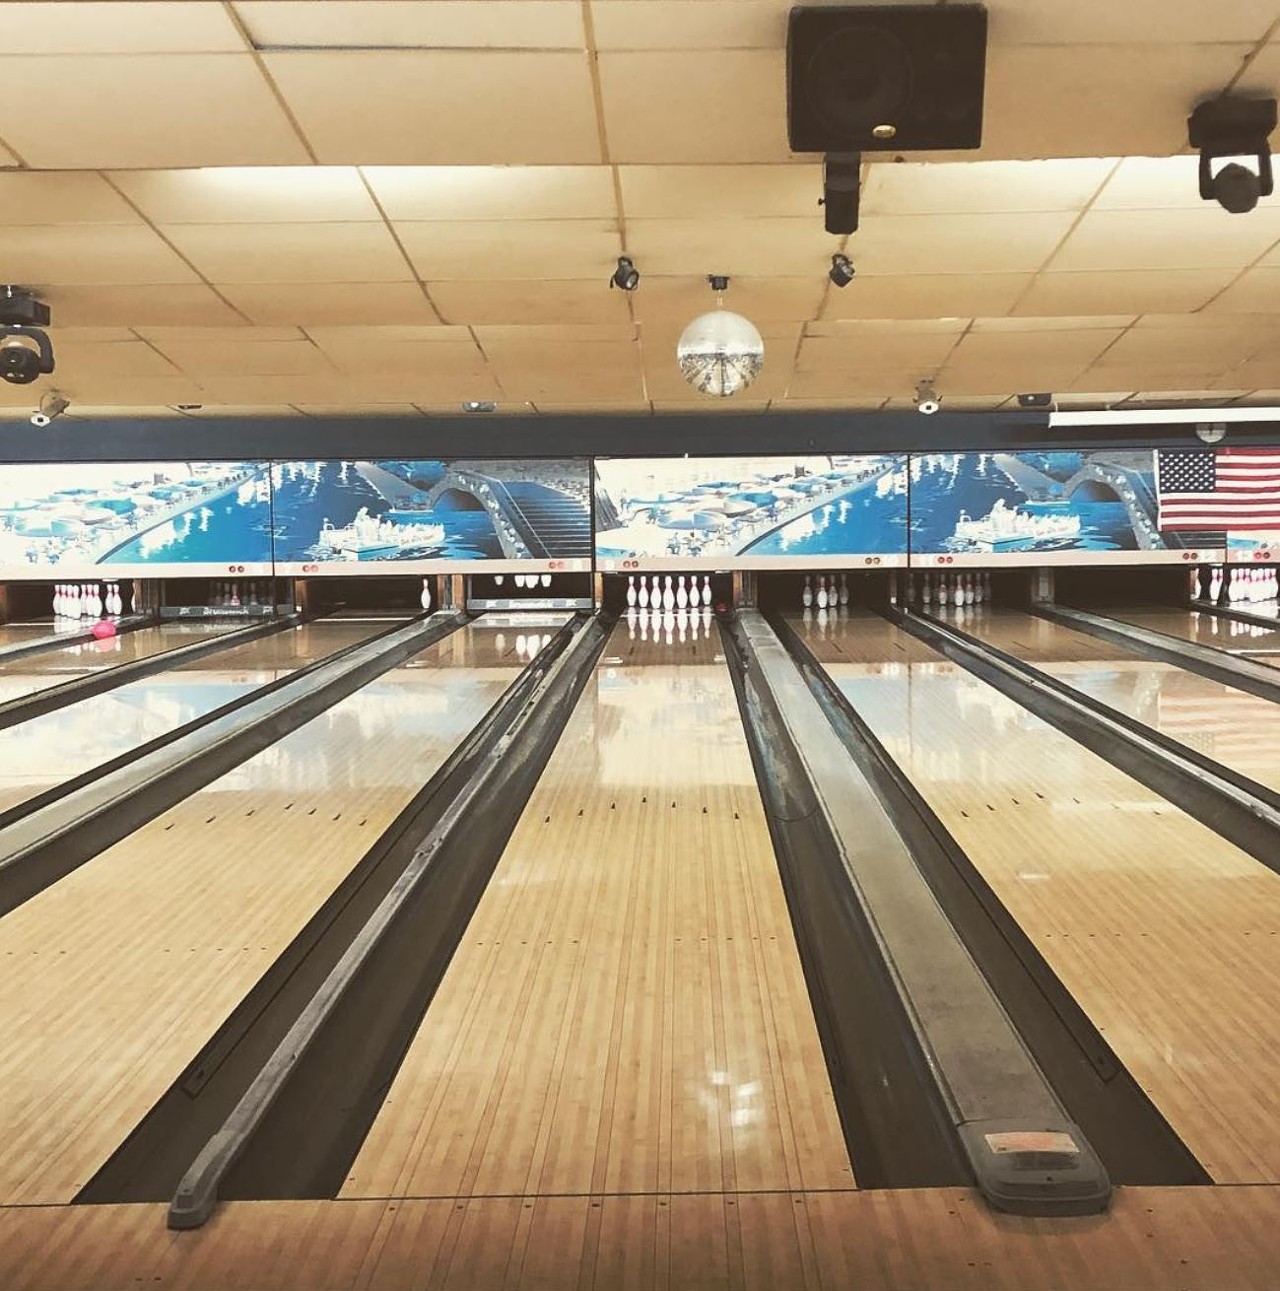 Oak Hills Lanes
7330 Callaghan Rd, (210) 344-6251, oakhillslanes.com
While the cafe located within Oak Hills Lanes is open all day, every day, the lanes themselves stay open well into the night - until midnight during the week and of course, later on the weekends.
Photo via Instagram / ea112112